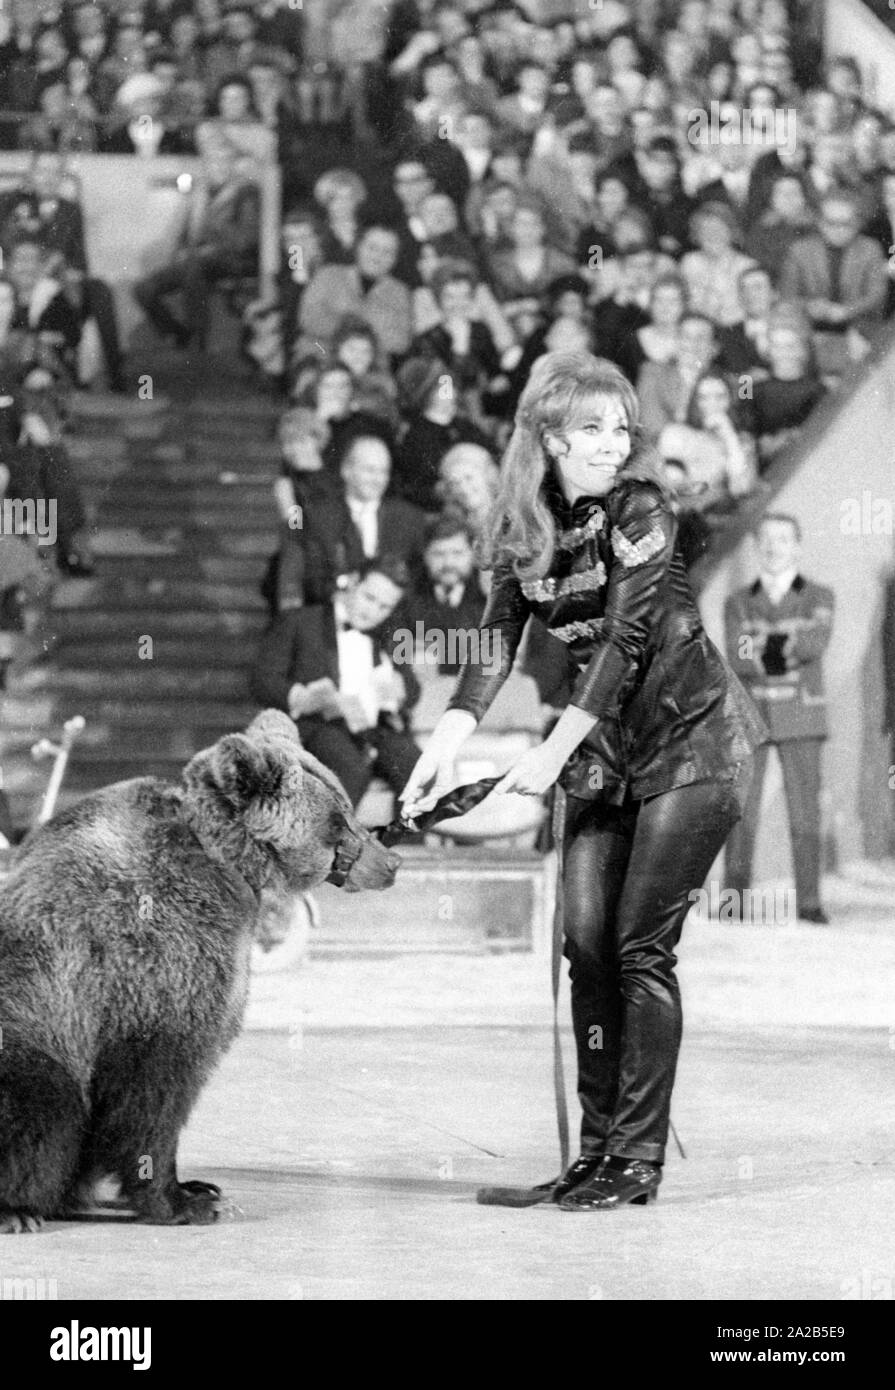 A circus program was held annually by celebrities in front of an audience for the television show 'Die Goldene Zehn' at Circus Krone in Munich. Photo of an animal show with bears. The woman's identity is unclear. Stock Photo